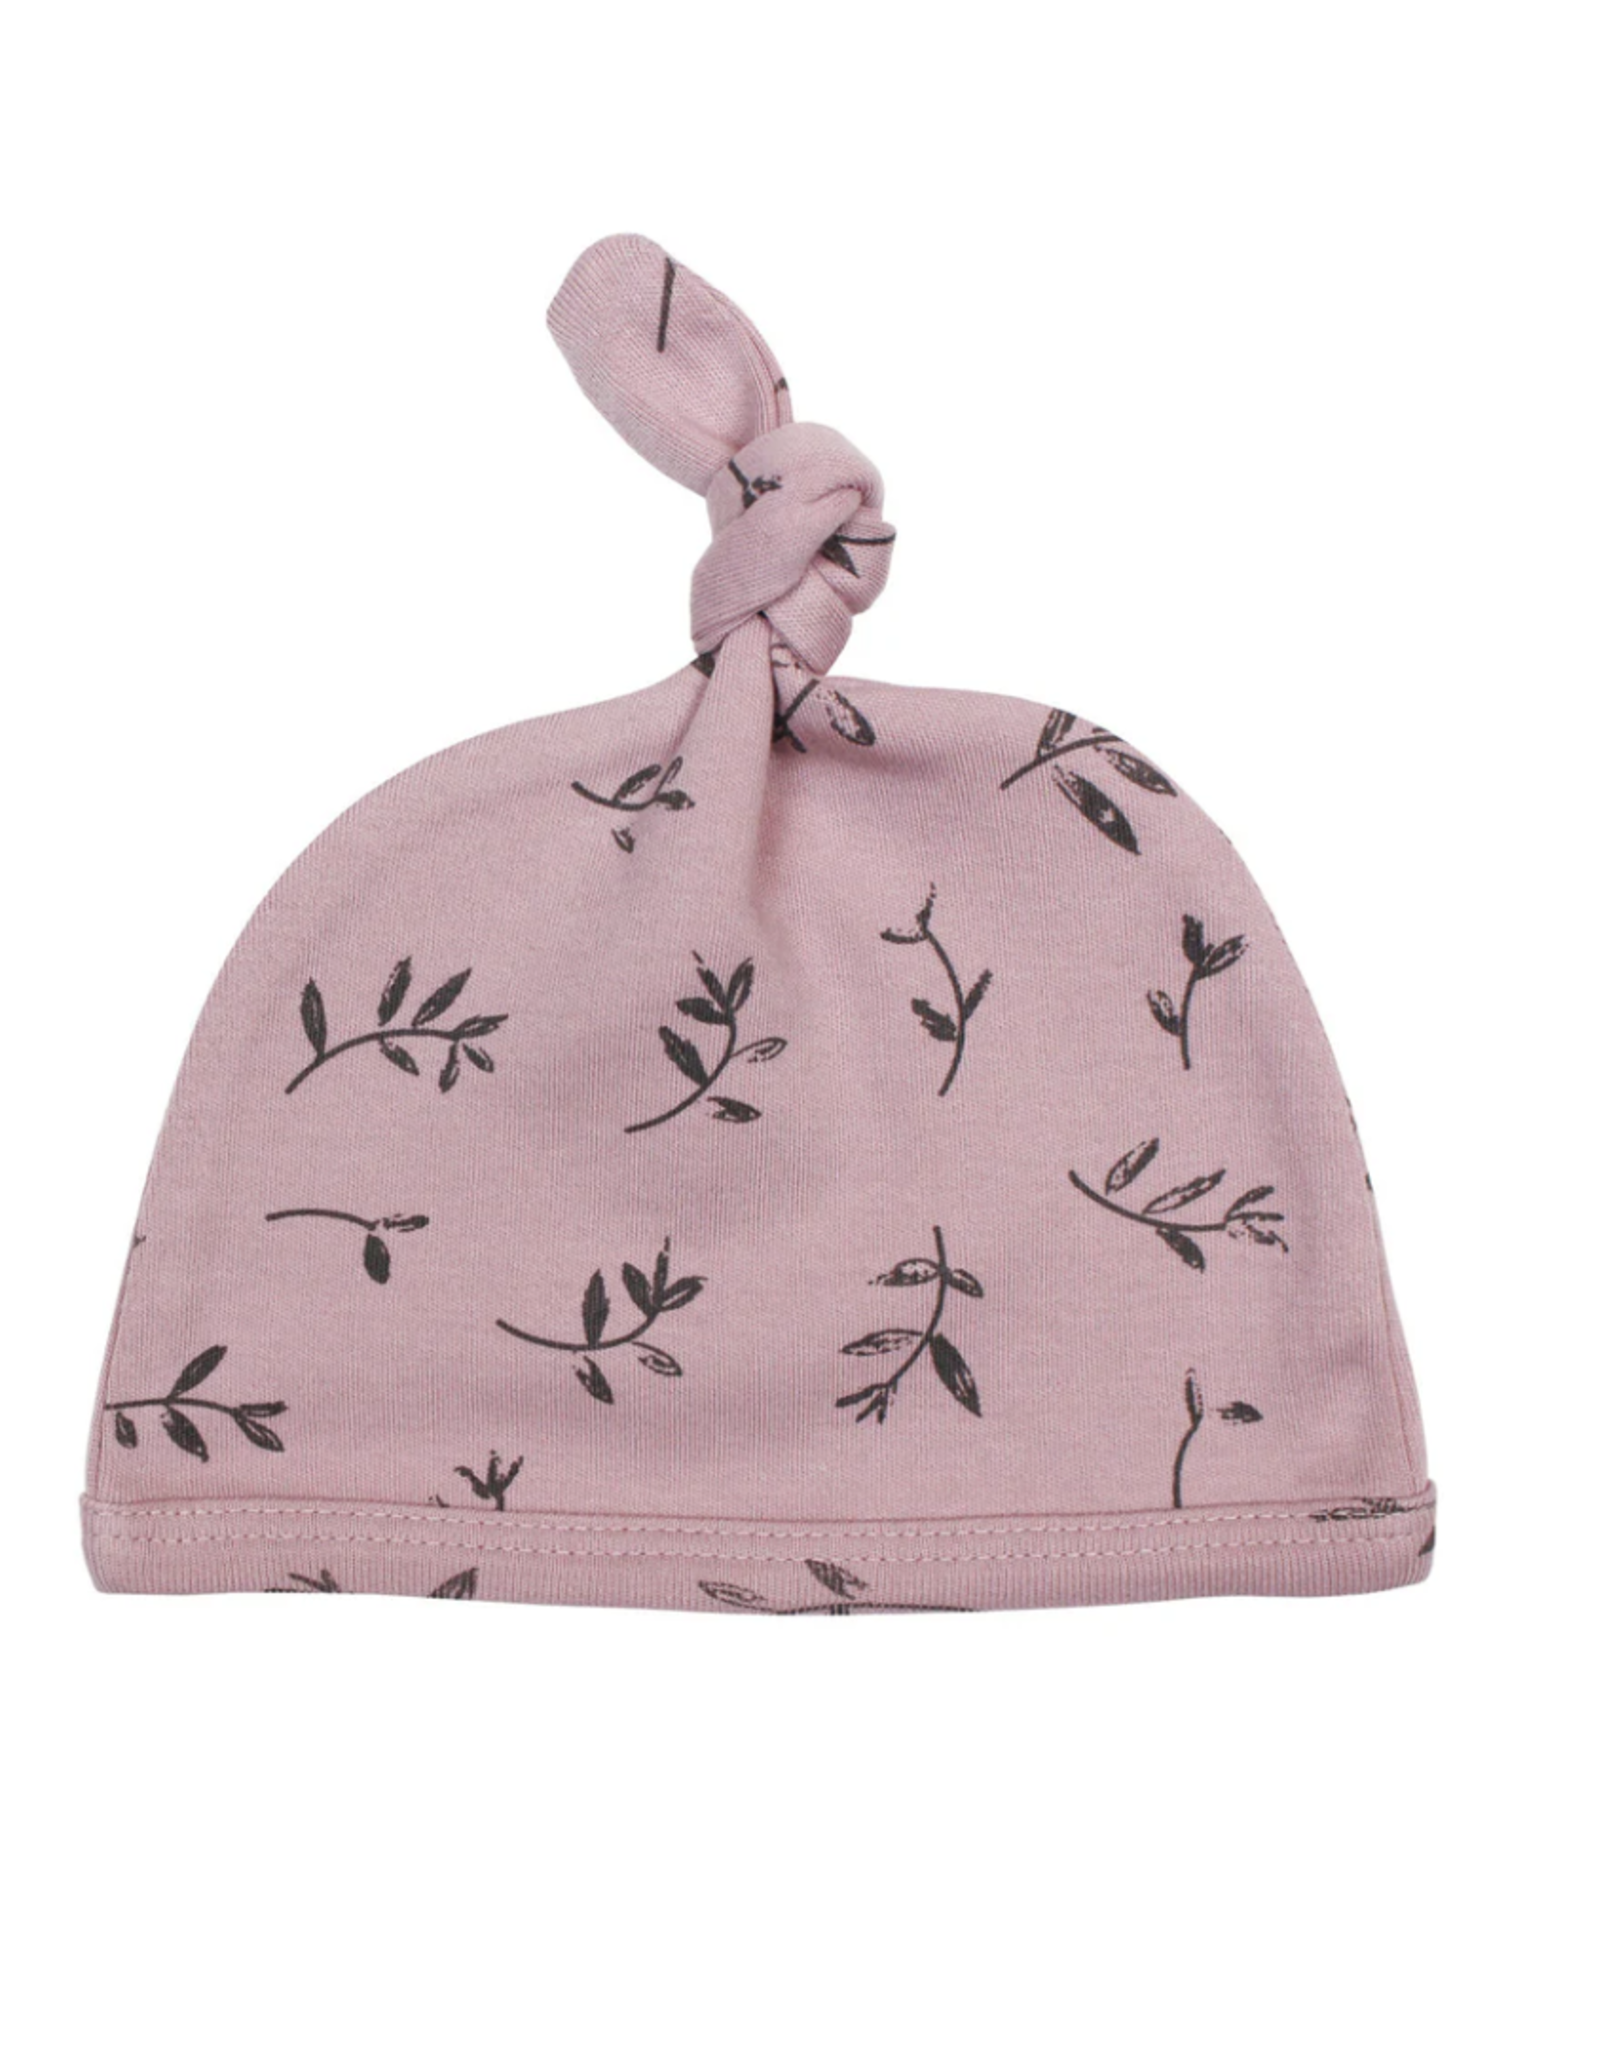 Printed Top Knot Hat in Blossom Flower 0-3 Months